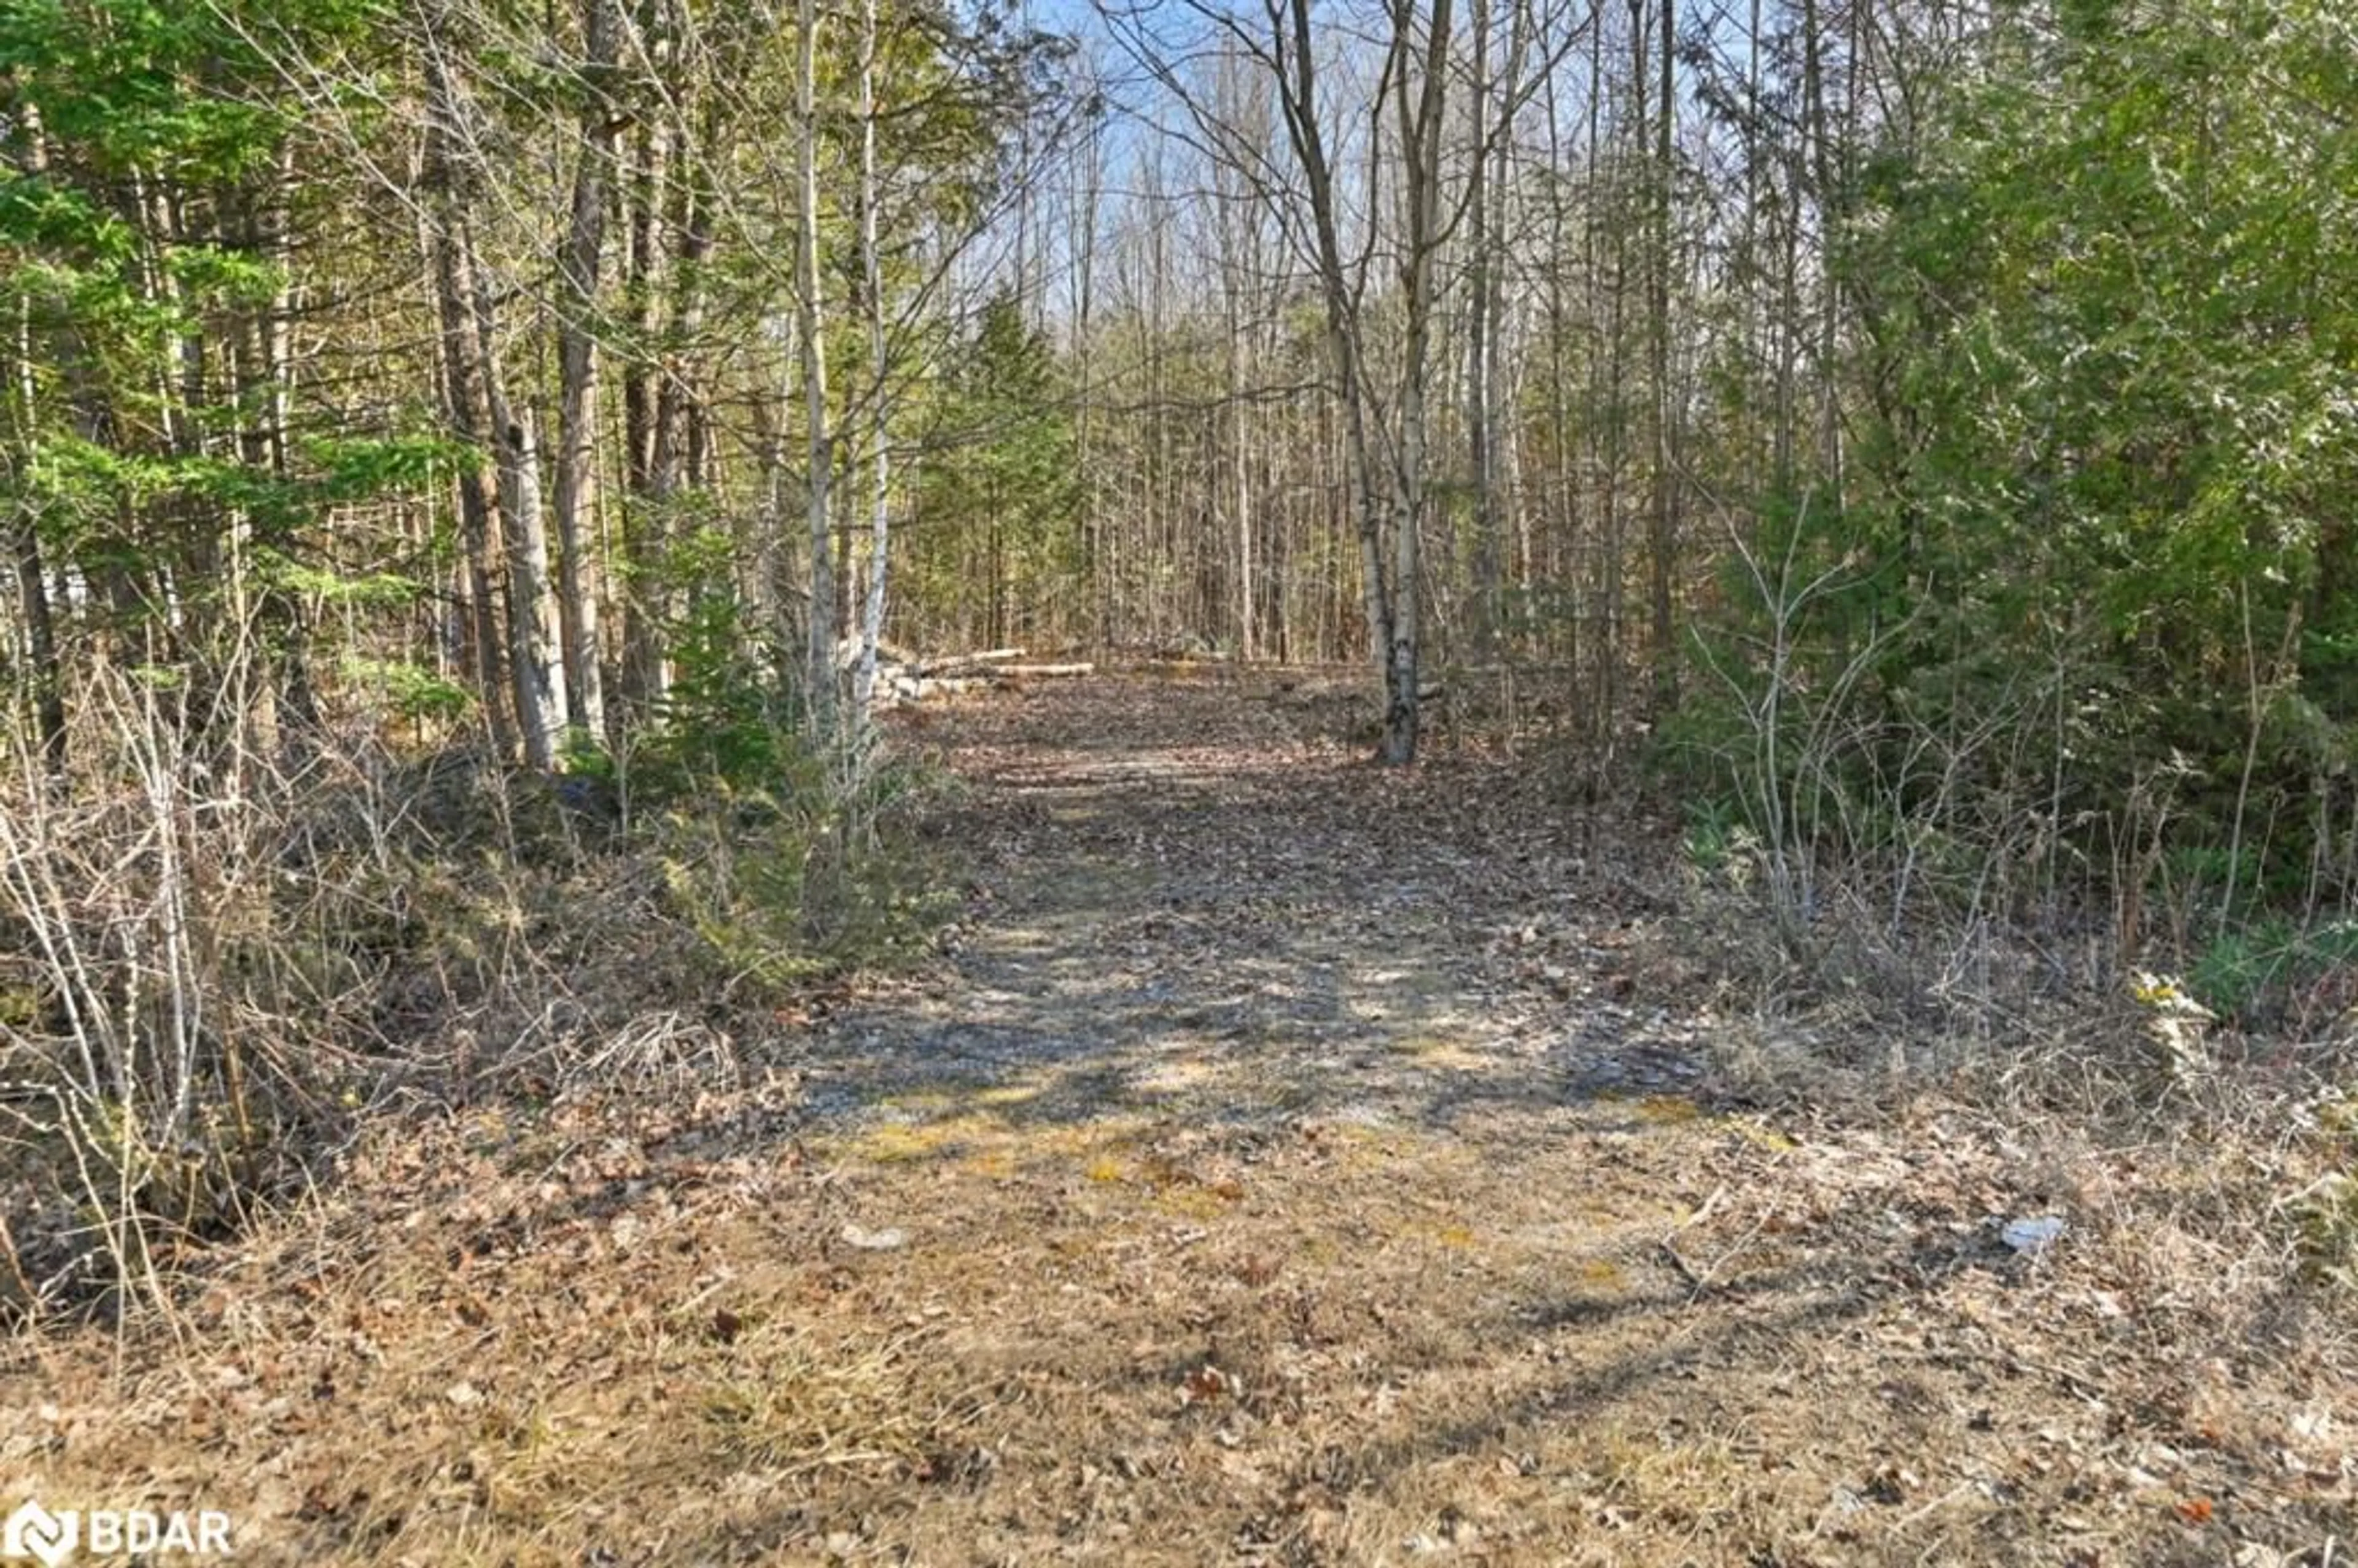 Forest view for 0 Quin Mo Lac Rd, Madoc Ontario K0K 2K0